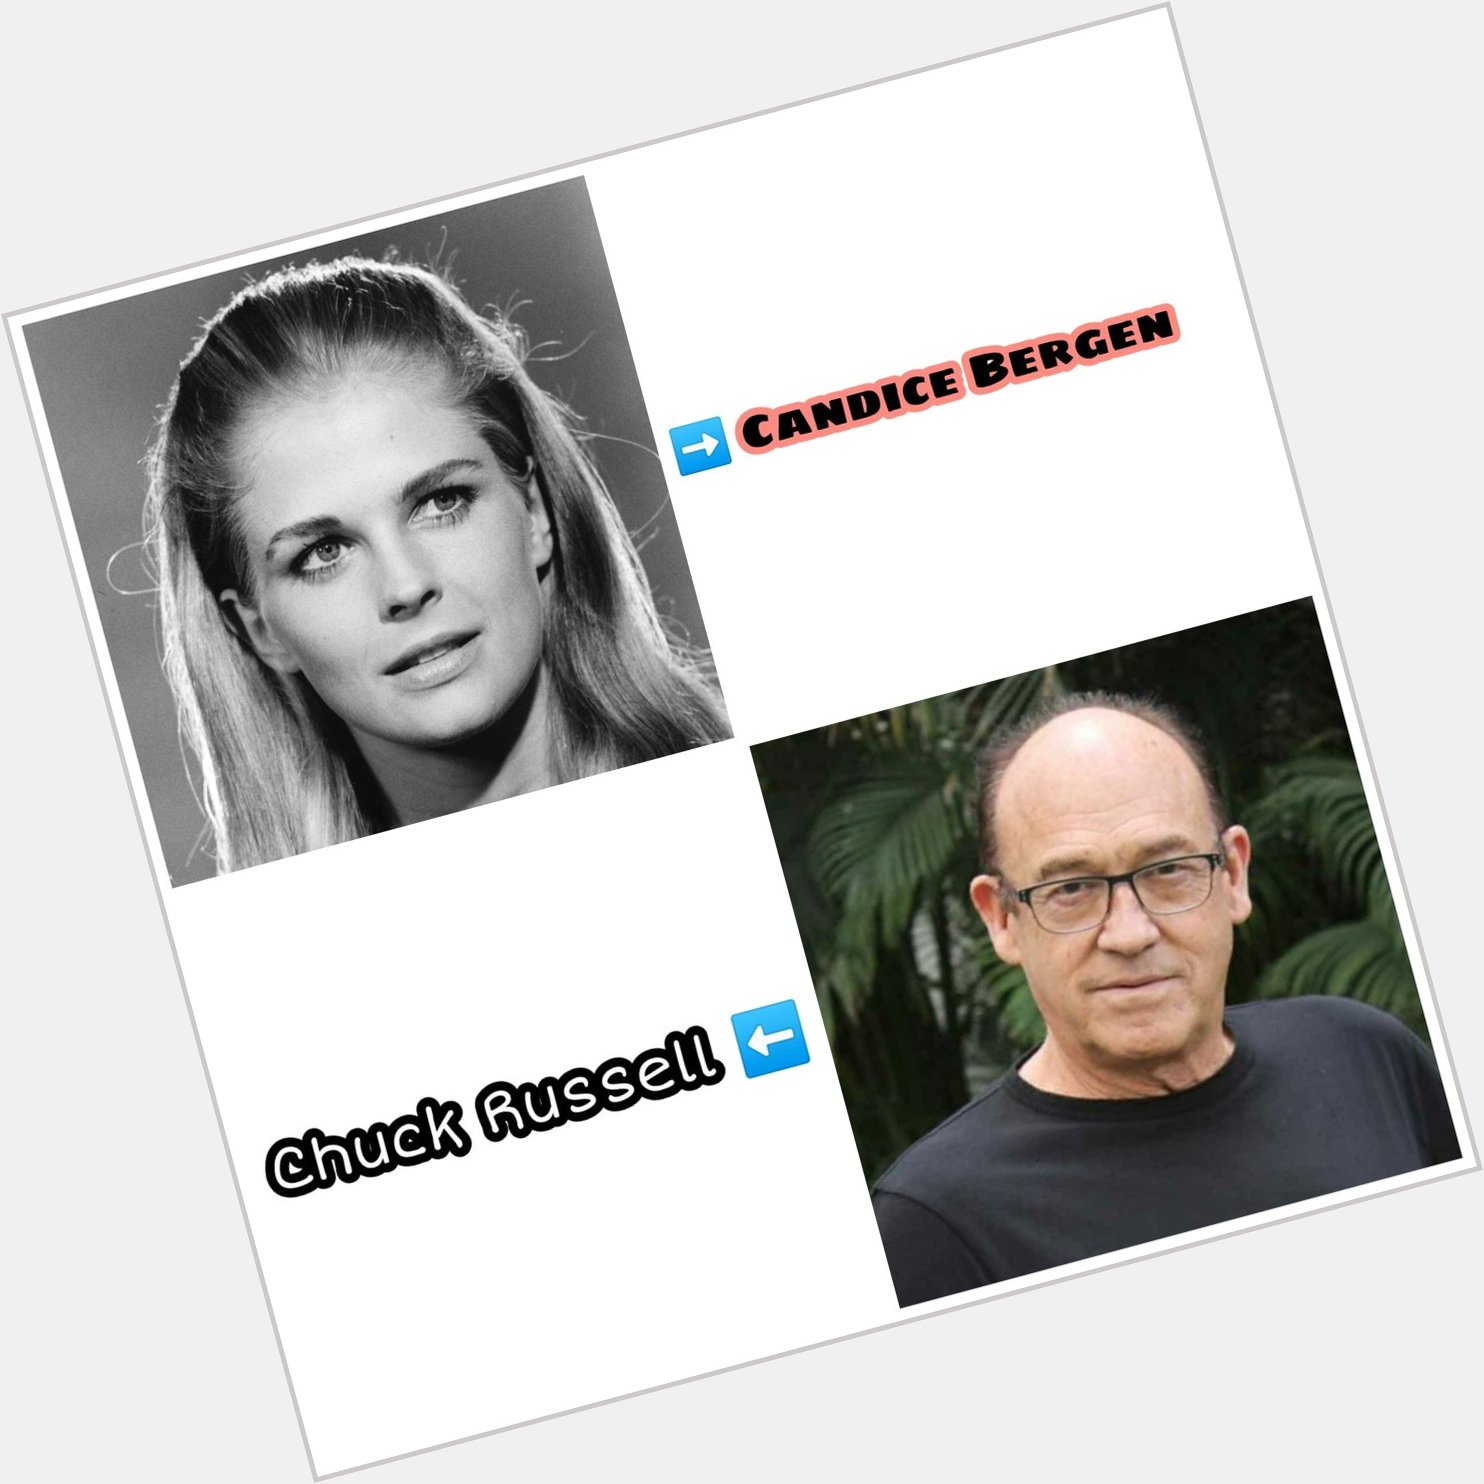 Happy Birthday Candice Bergen and Chuck Russell..        